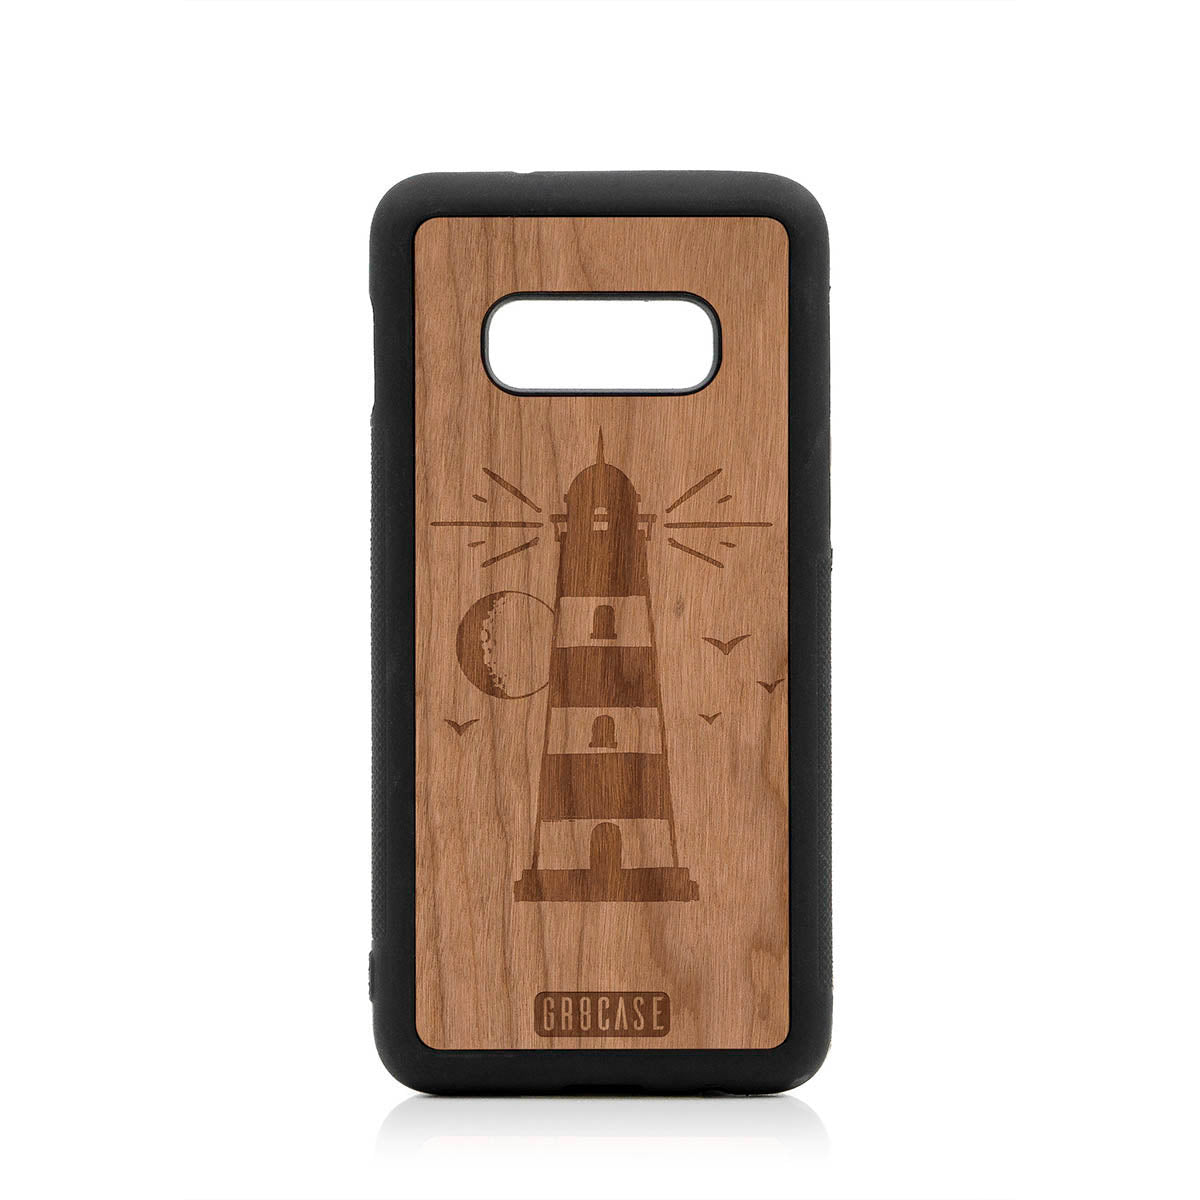 Midnight Lighthouse Design Wood Case For Samsung Galaxy S10E